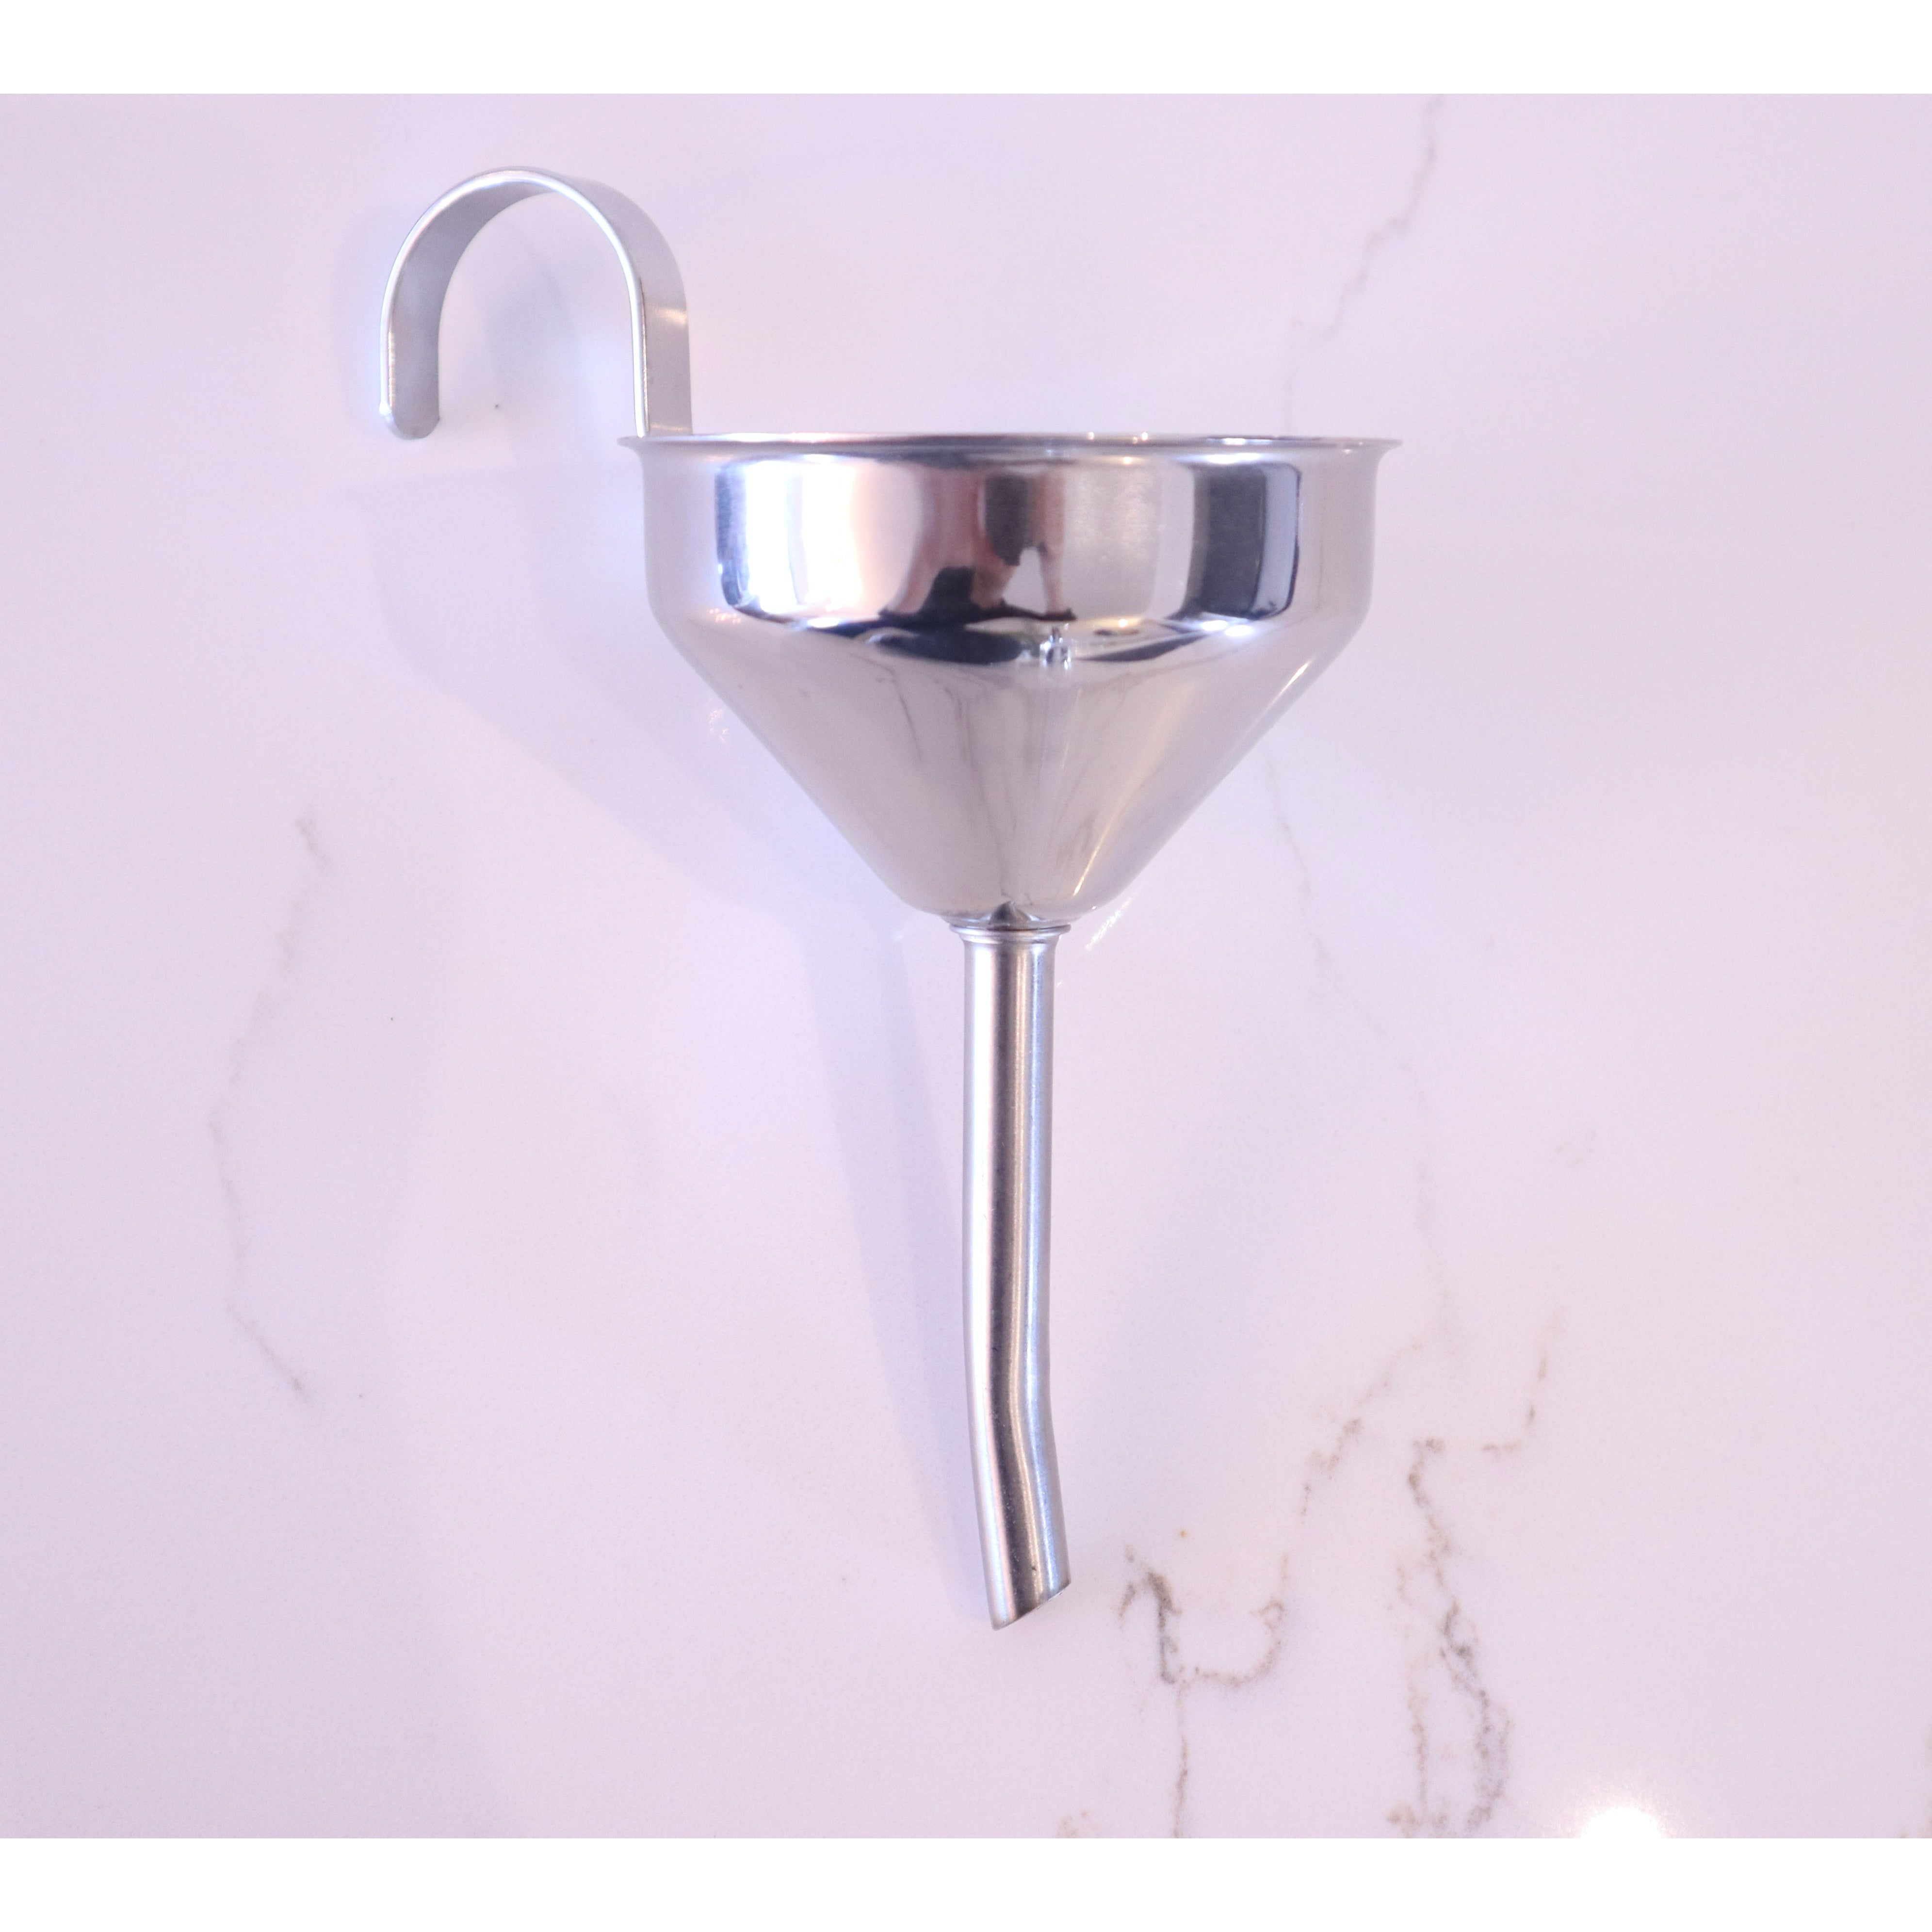 Eppicotispai Stainless Steel 18/10 Funnel with Decanter Filter